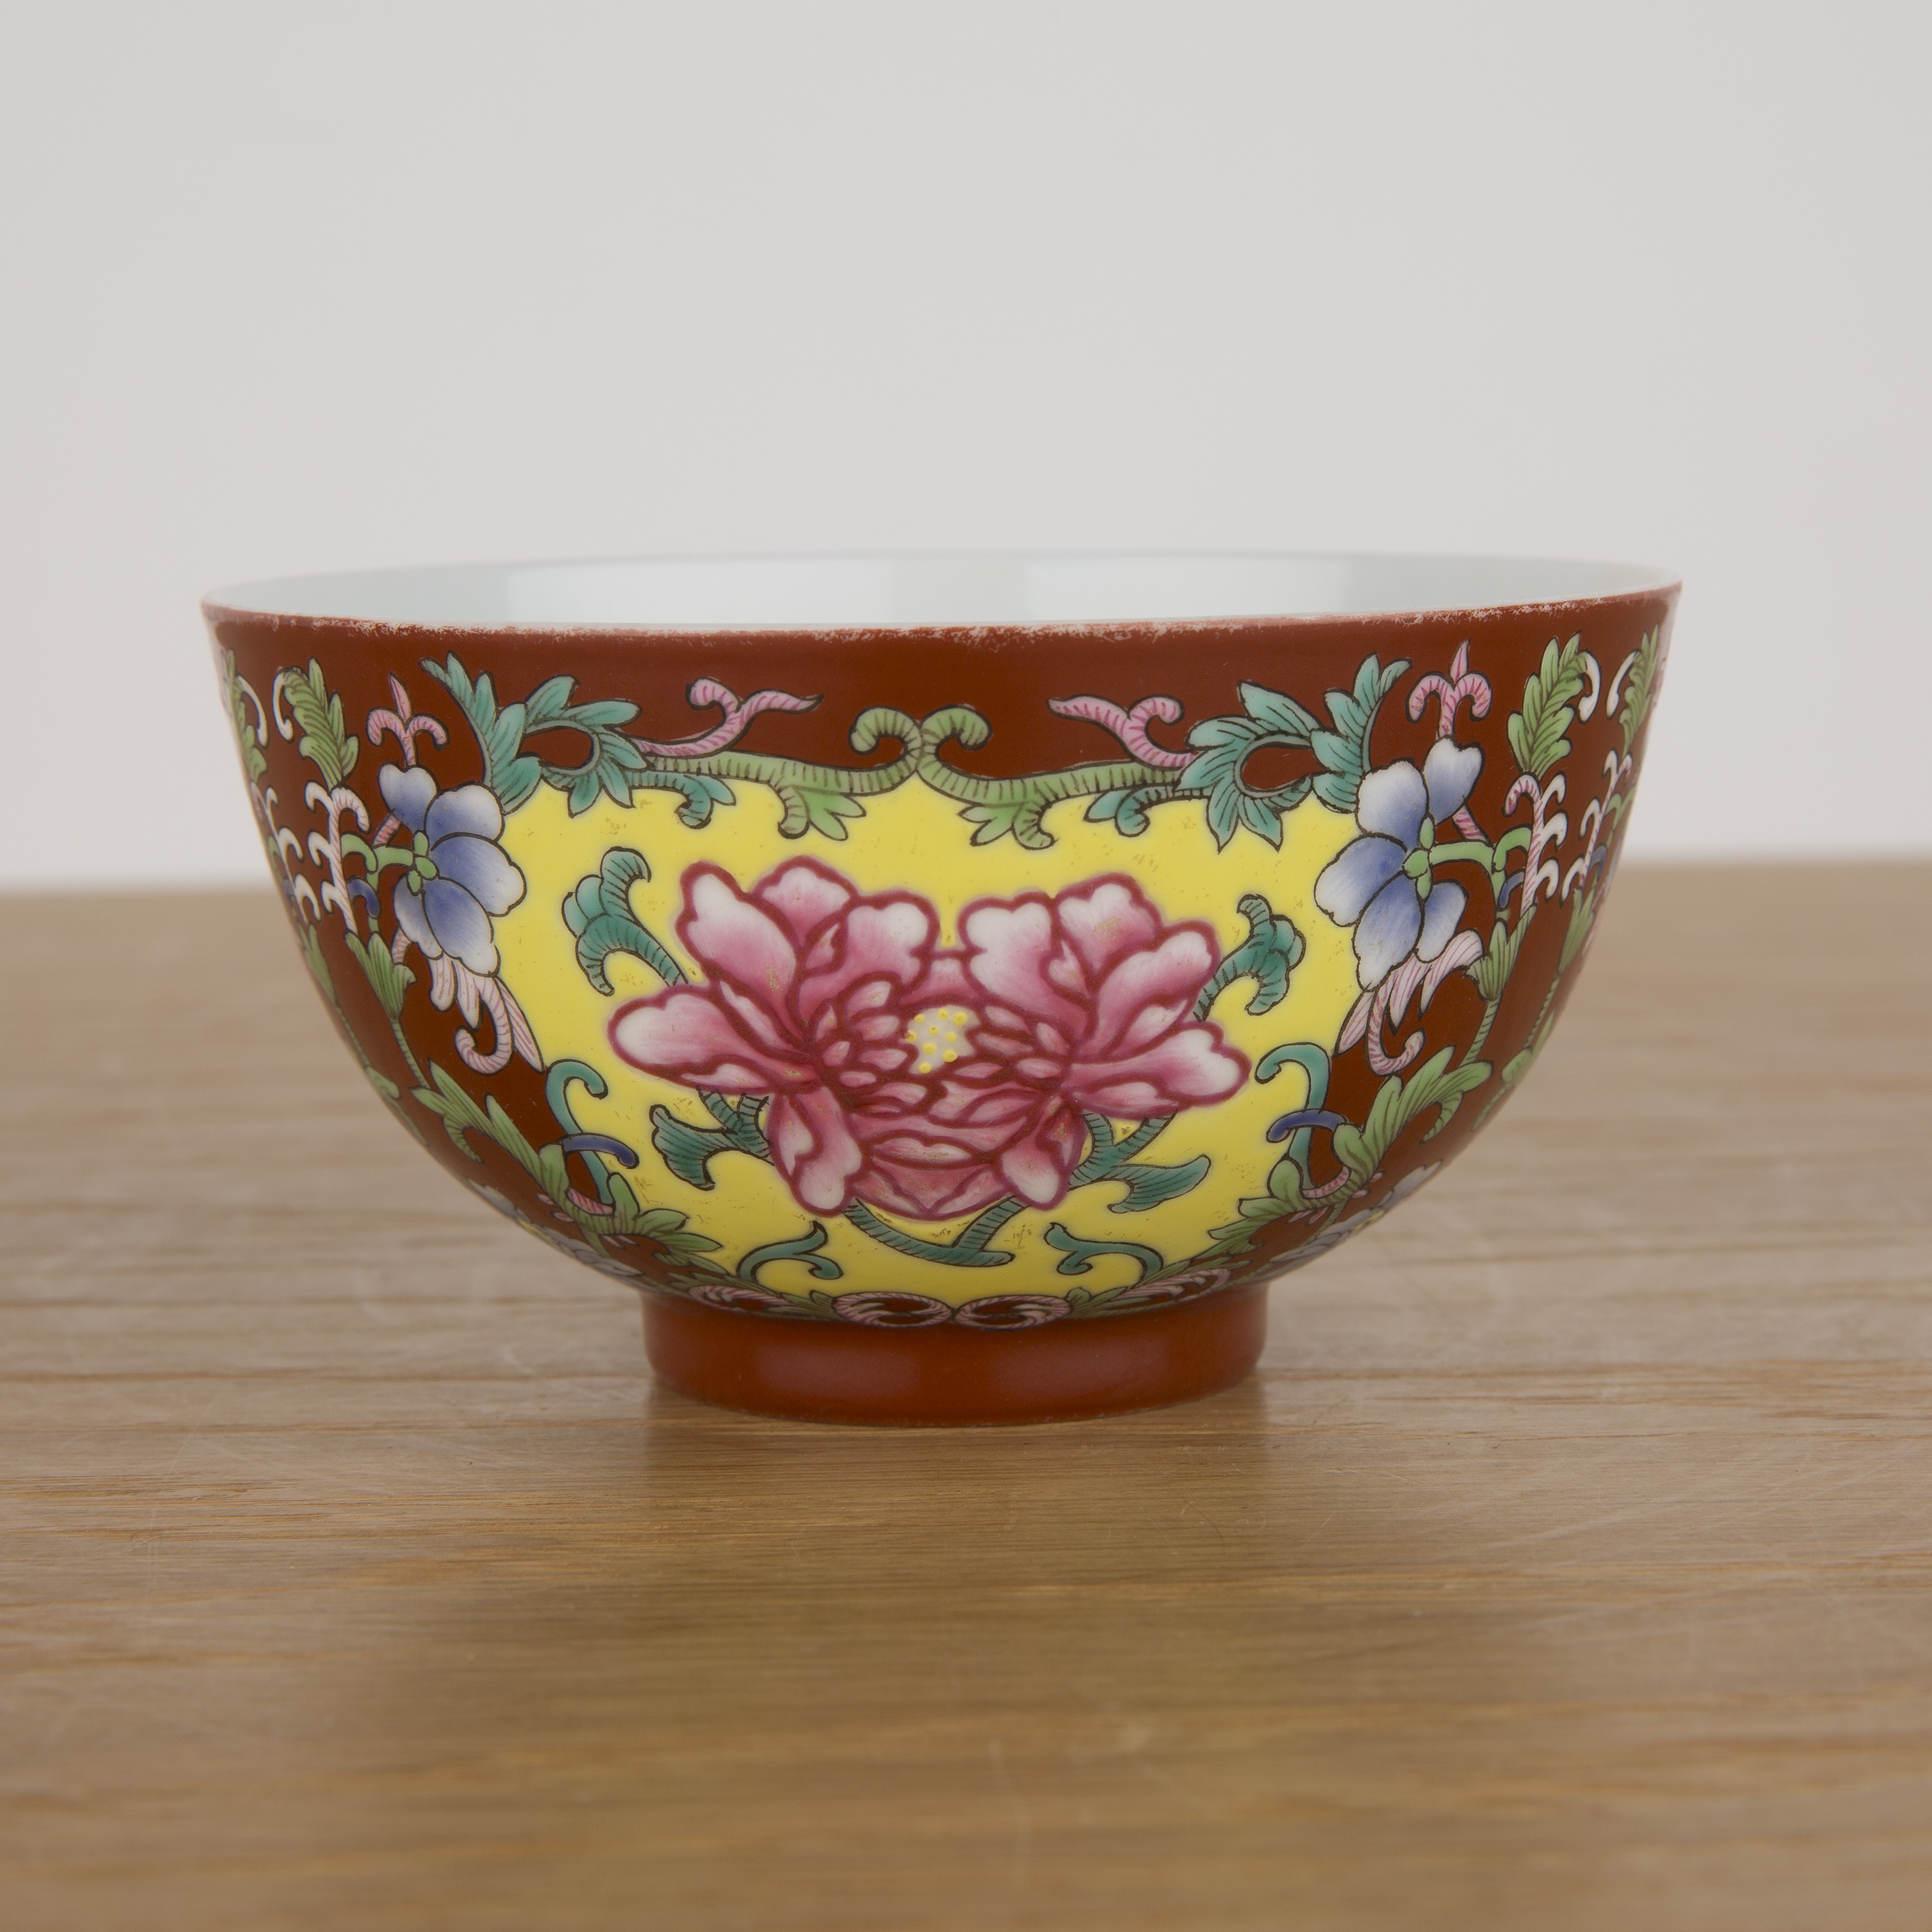 Polychrome enamelled porcelain bowl Chinese, 19th/20th Century painted with peonies and trailing - Image 3 of 12